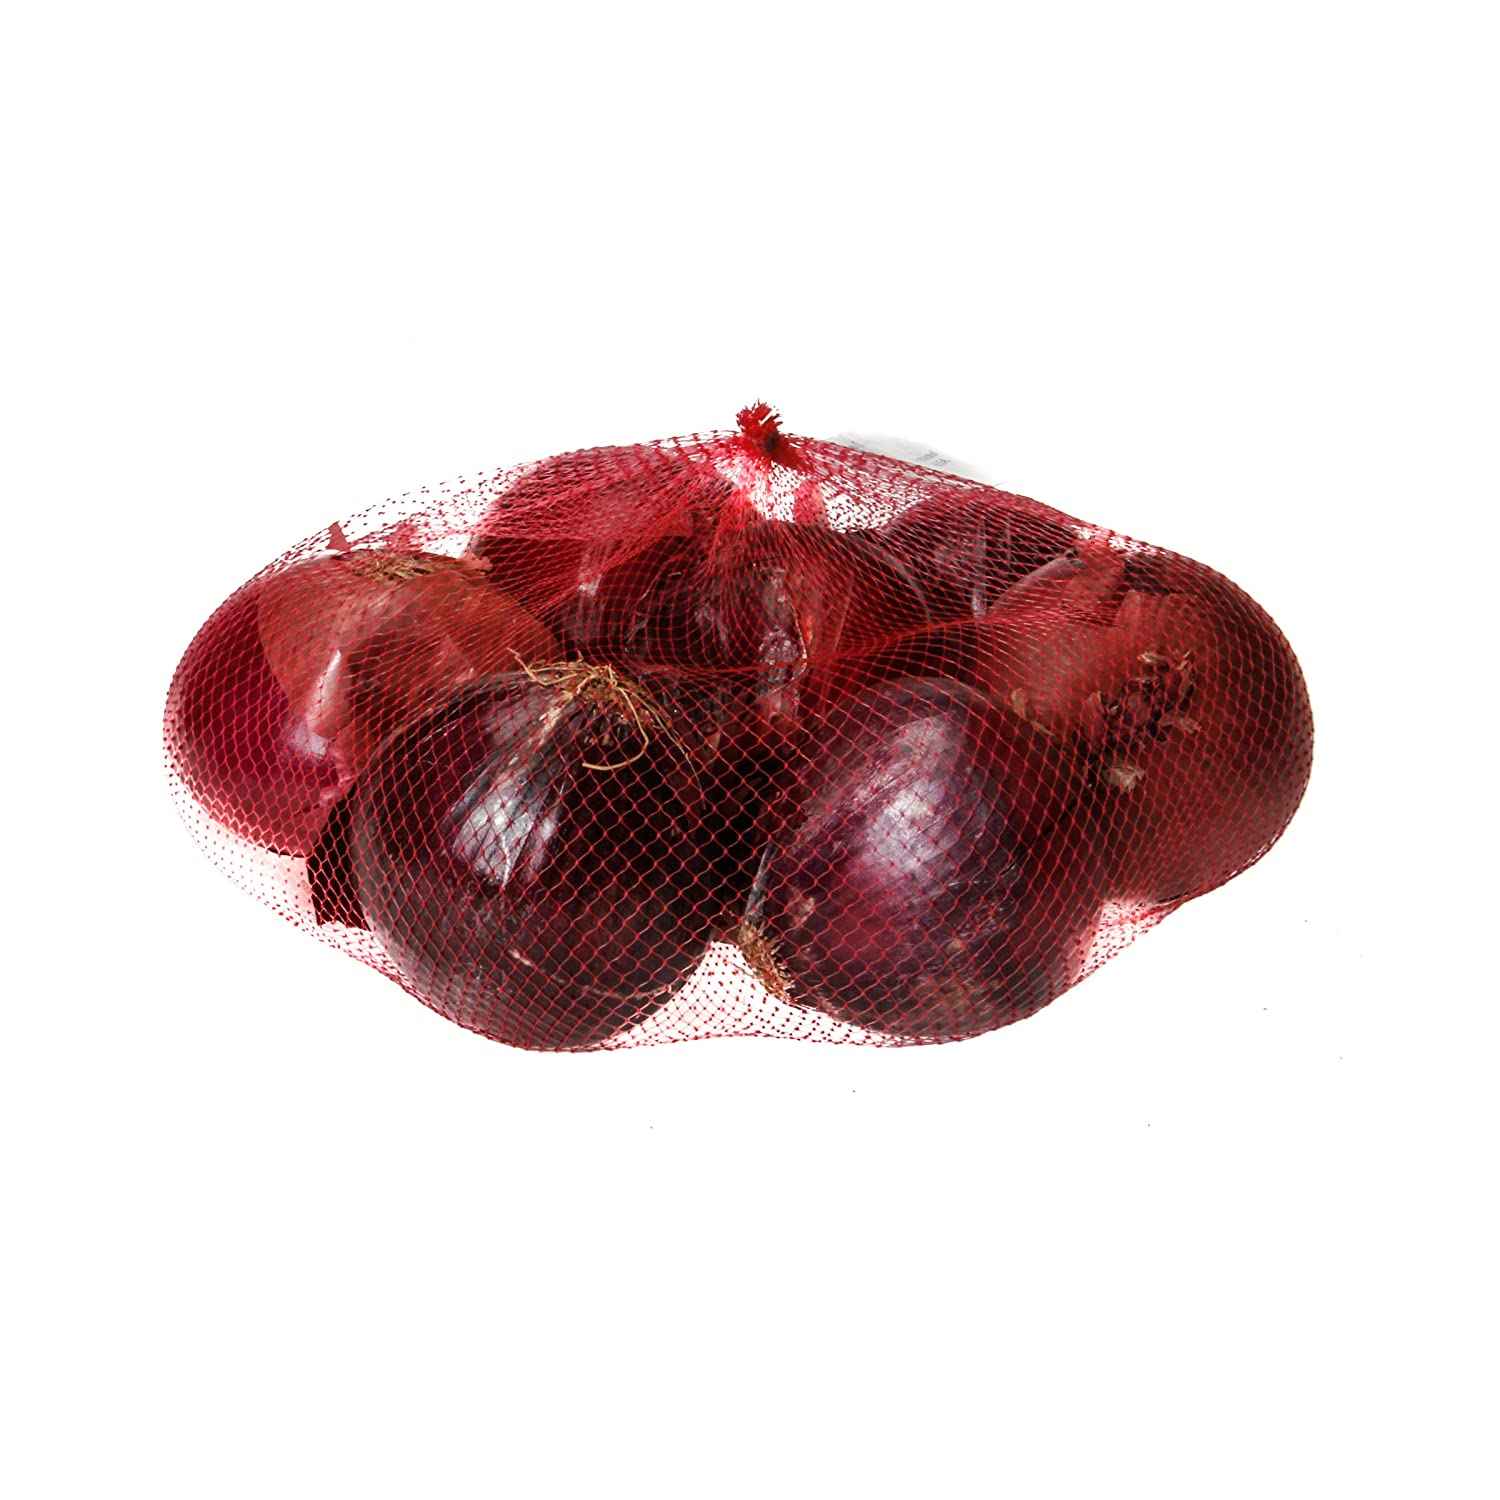 https://www.quicklly.com/upload_images/product/1627931436-red-onion-bag.jpg